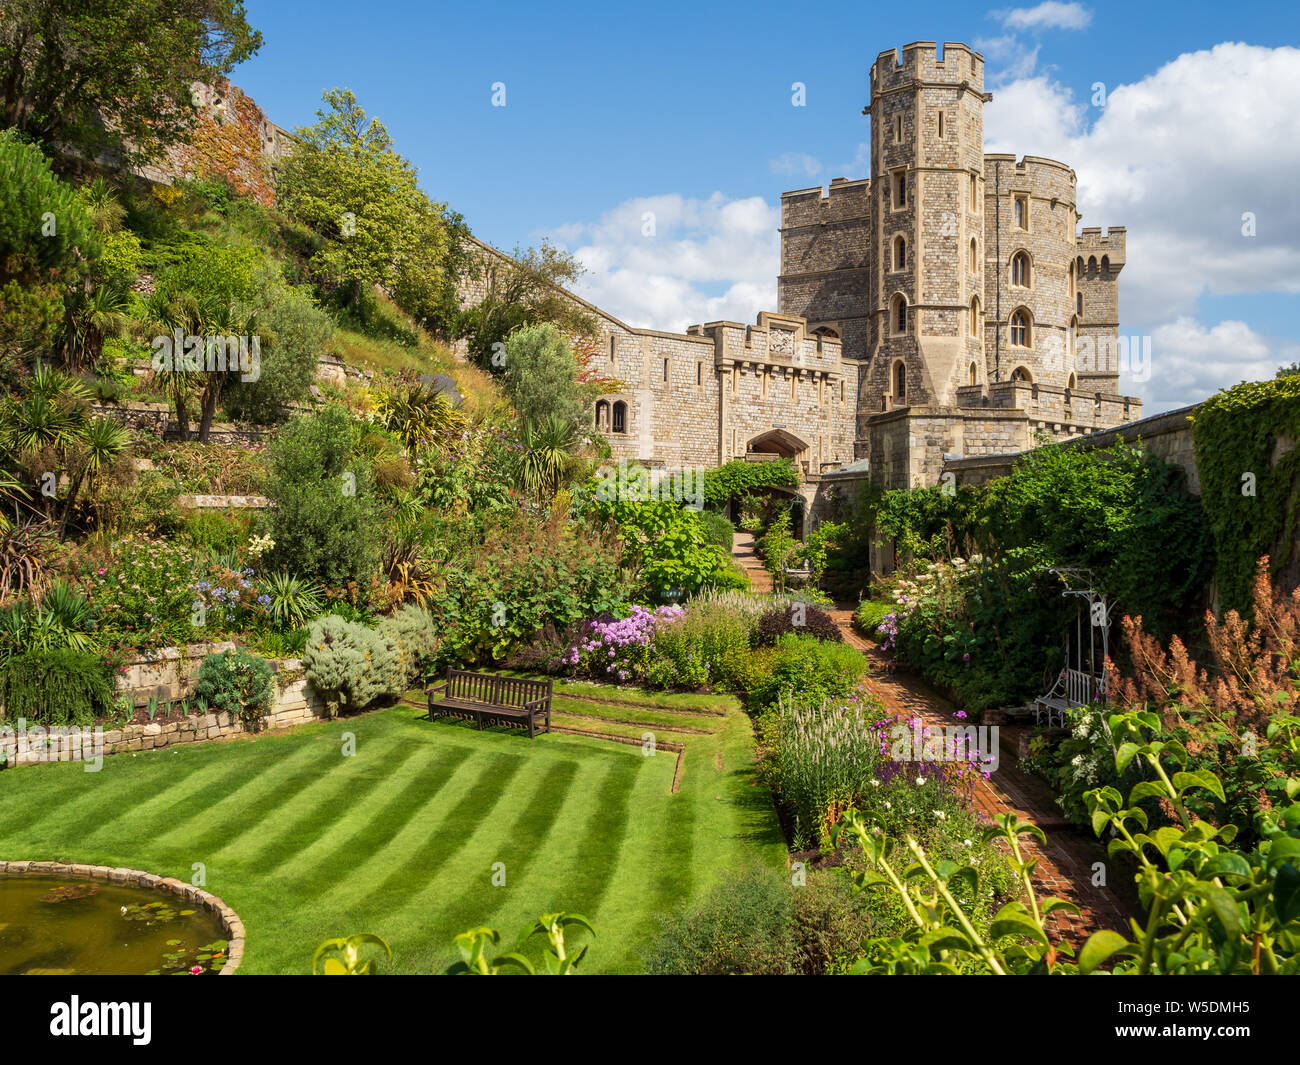 A private lawned area in the moat at the royal Windsor Castle in England on a hot summers day Stock Photo